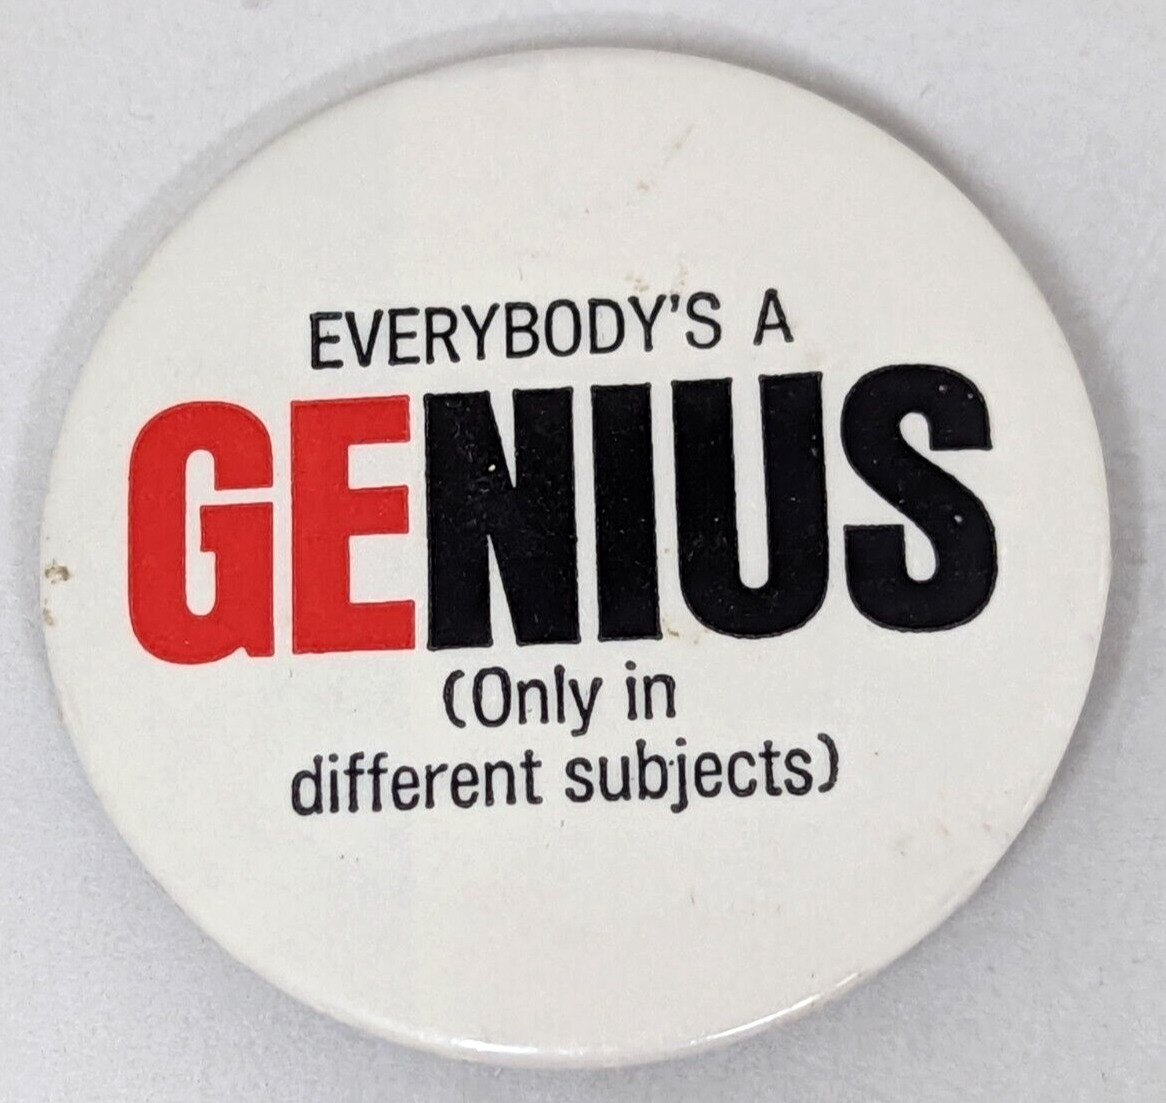 VTG Everybody's A Genius Only in Different Subjects Advertising Button Pin DW22